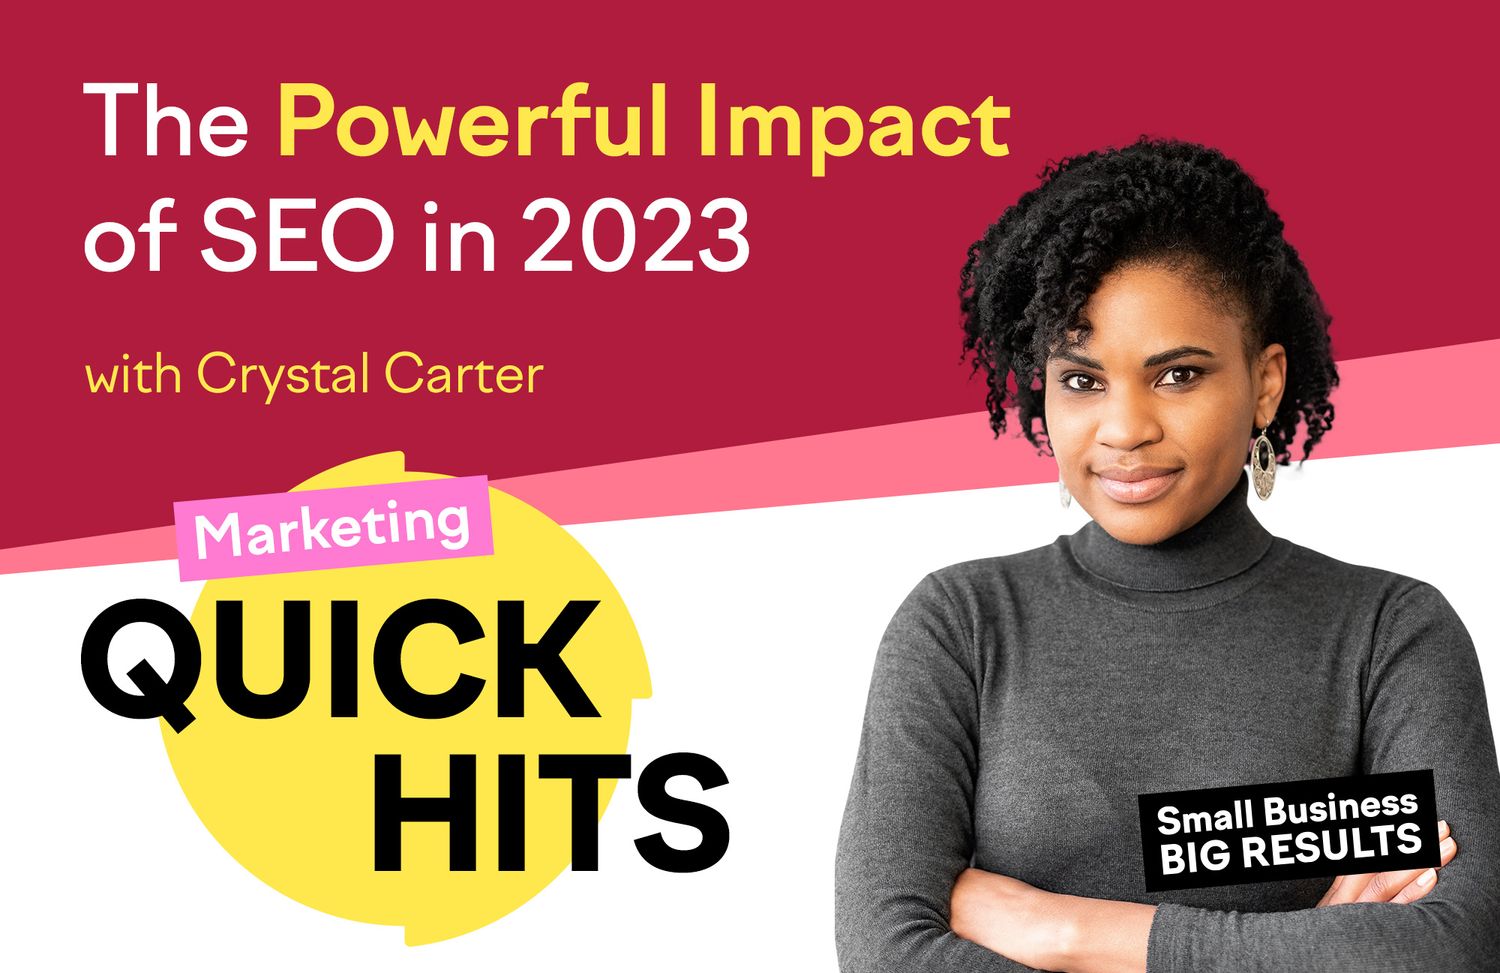 The powerful impact of SEO in 2023 with Crystal Carter